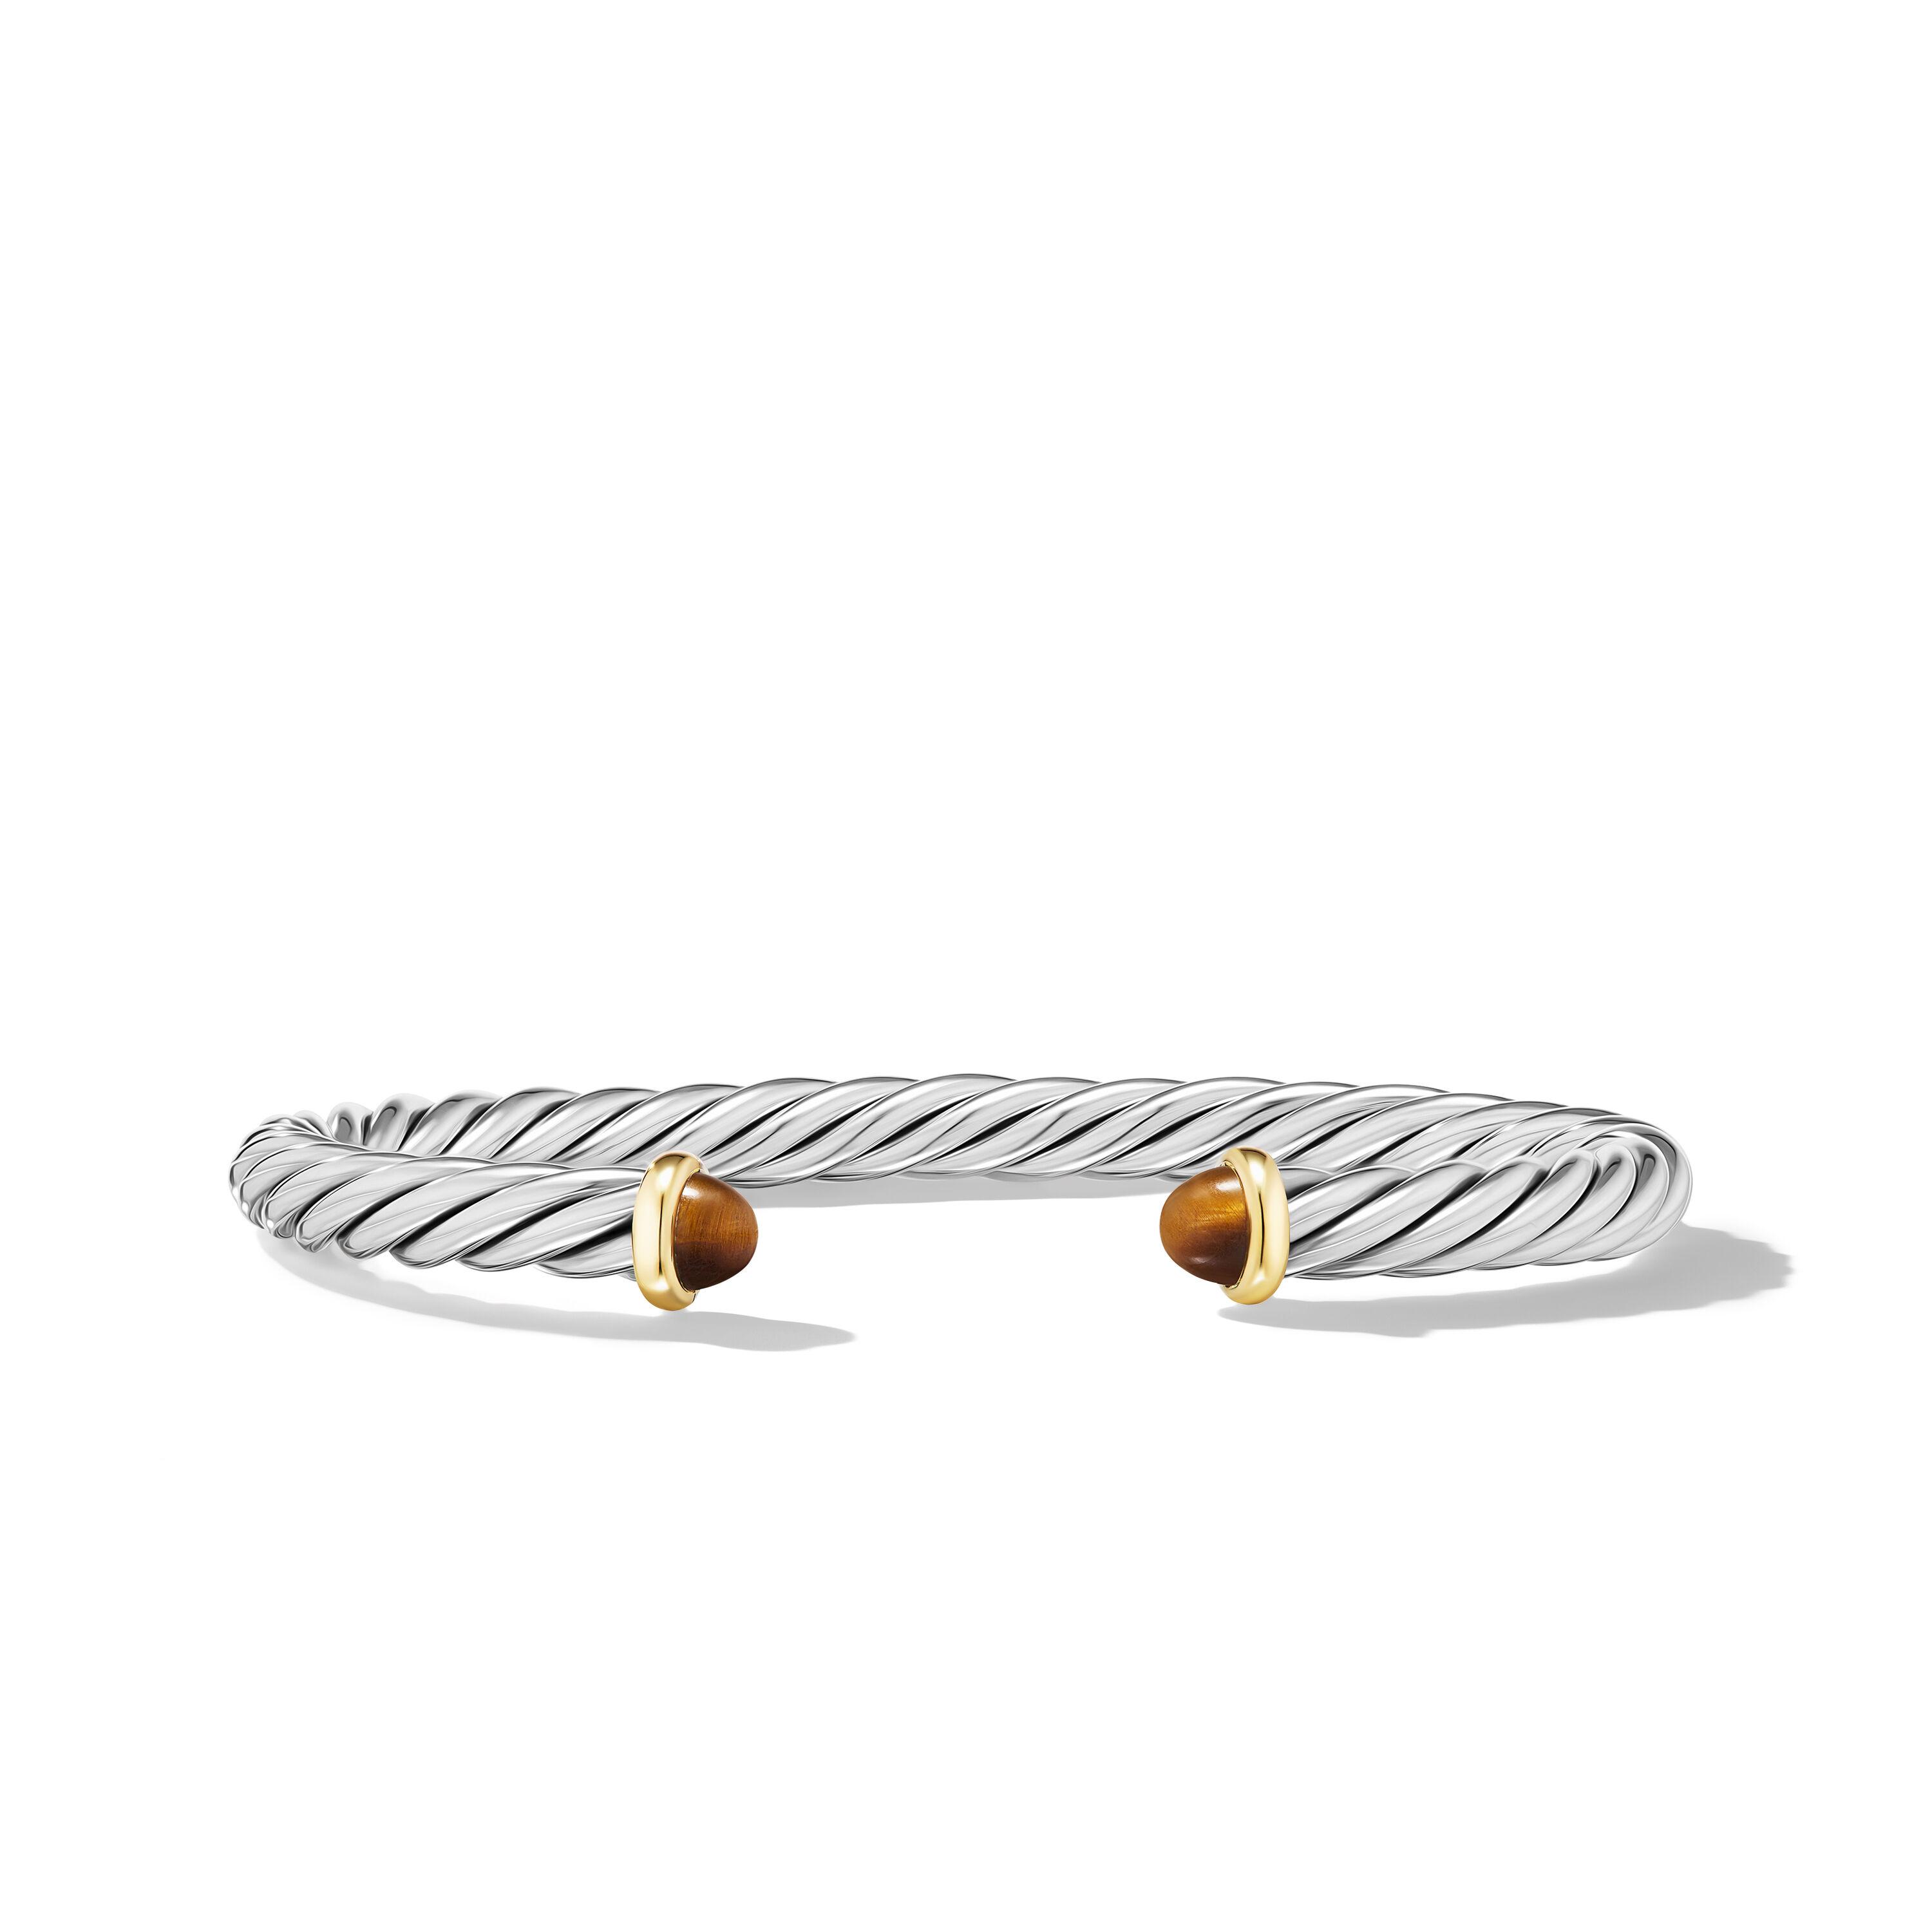 David Yurman 6mm Cable Cuff Bracelet in Sterling Silver with 14K Yellow Gold and Tiger's Eye, Small